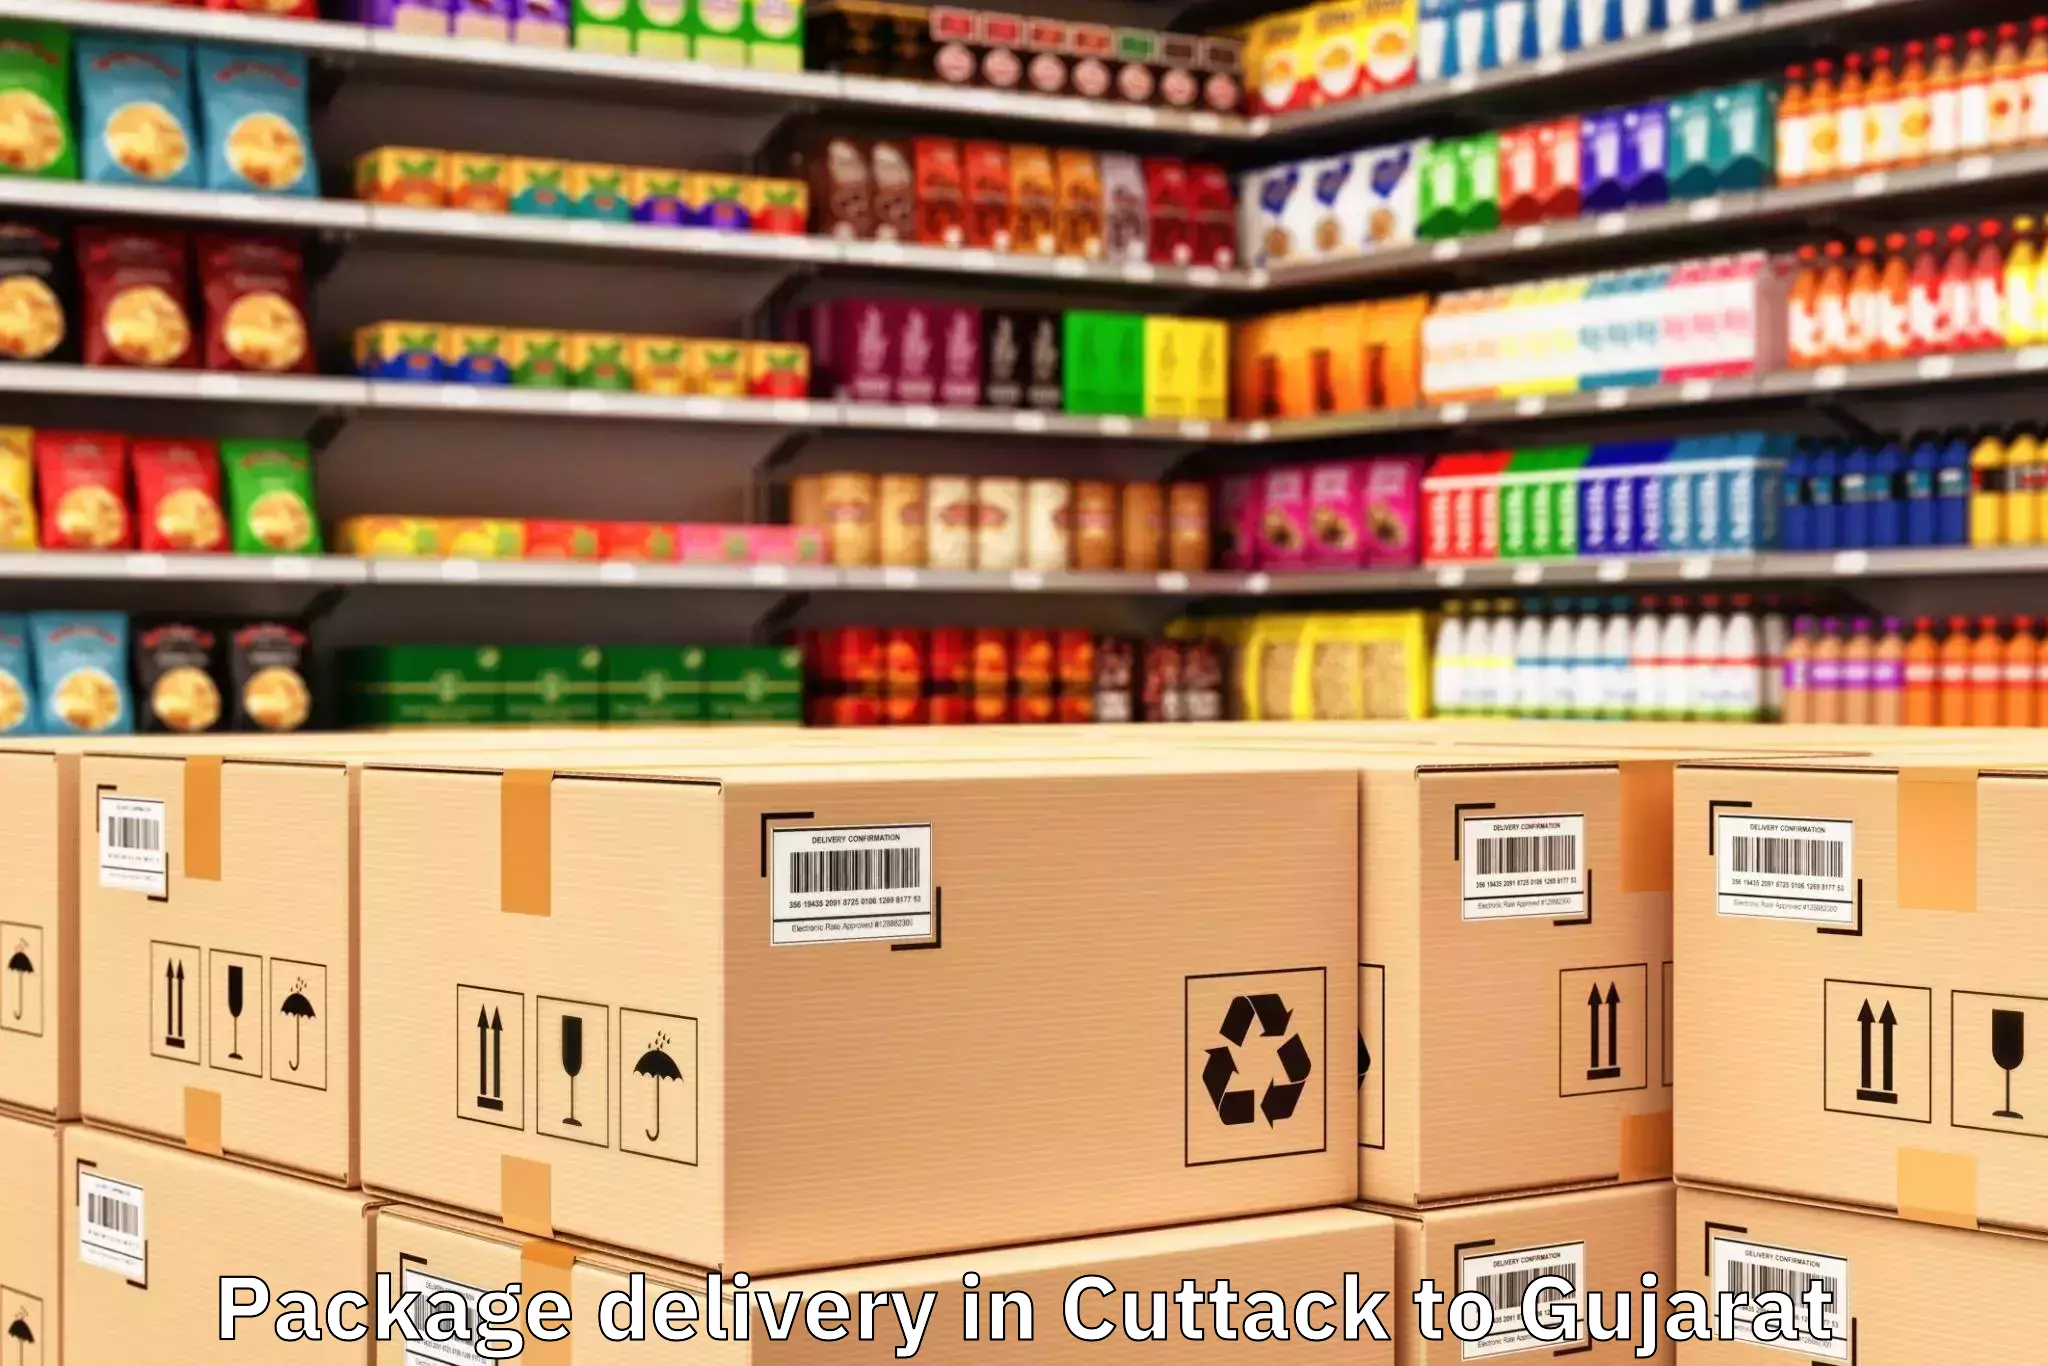 Reliable Cuttack to Jafarabad Package Delivery